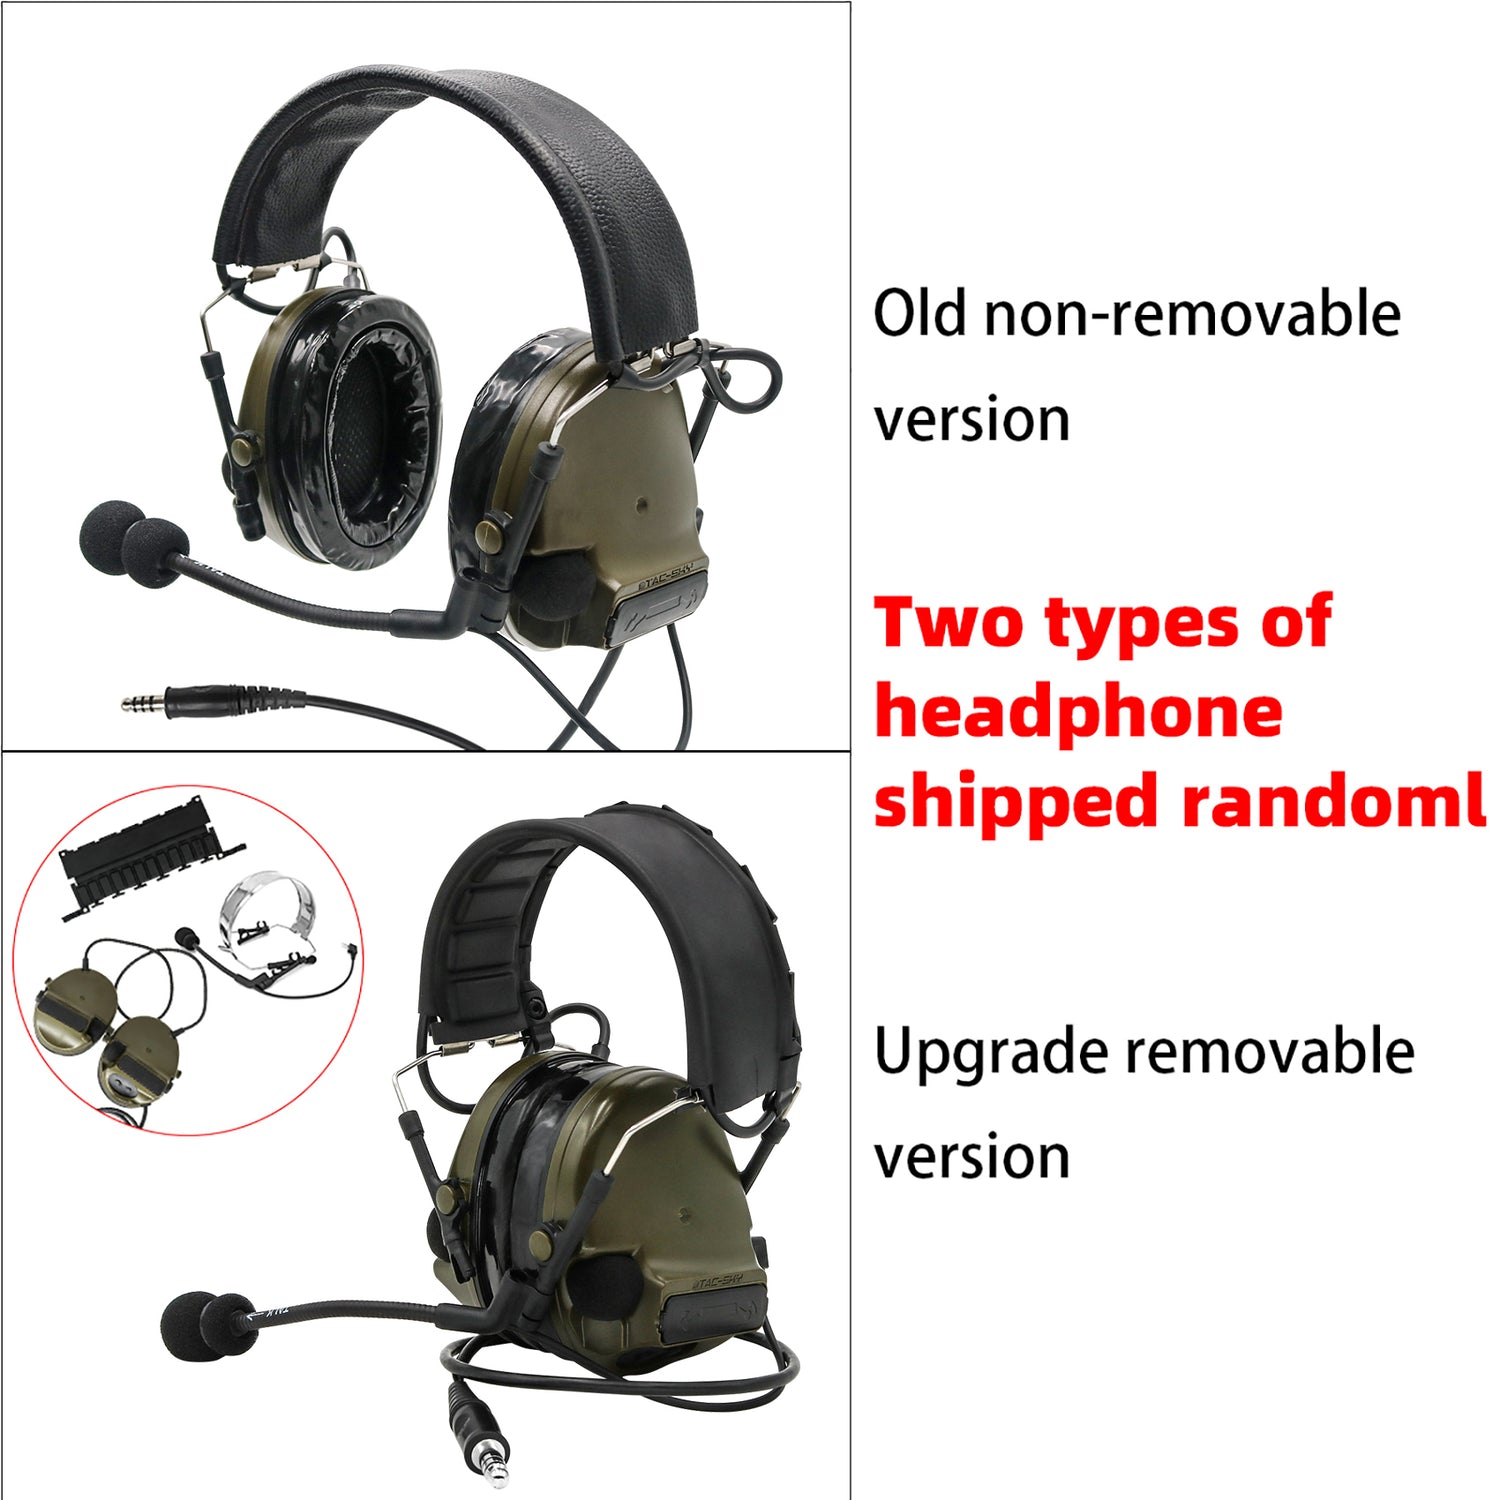 TAC-SKY C3 Tactical Headset Noise-canceling airsoft protective 